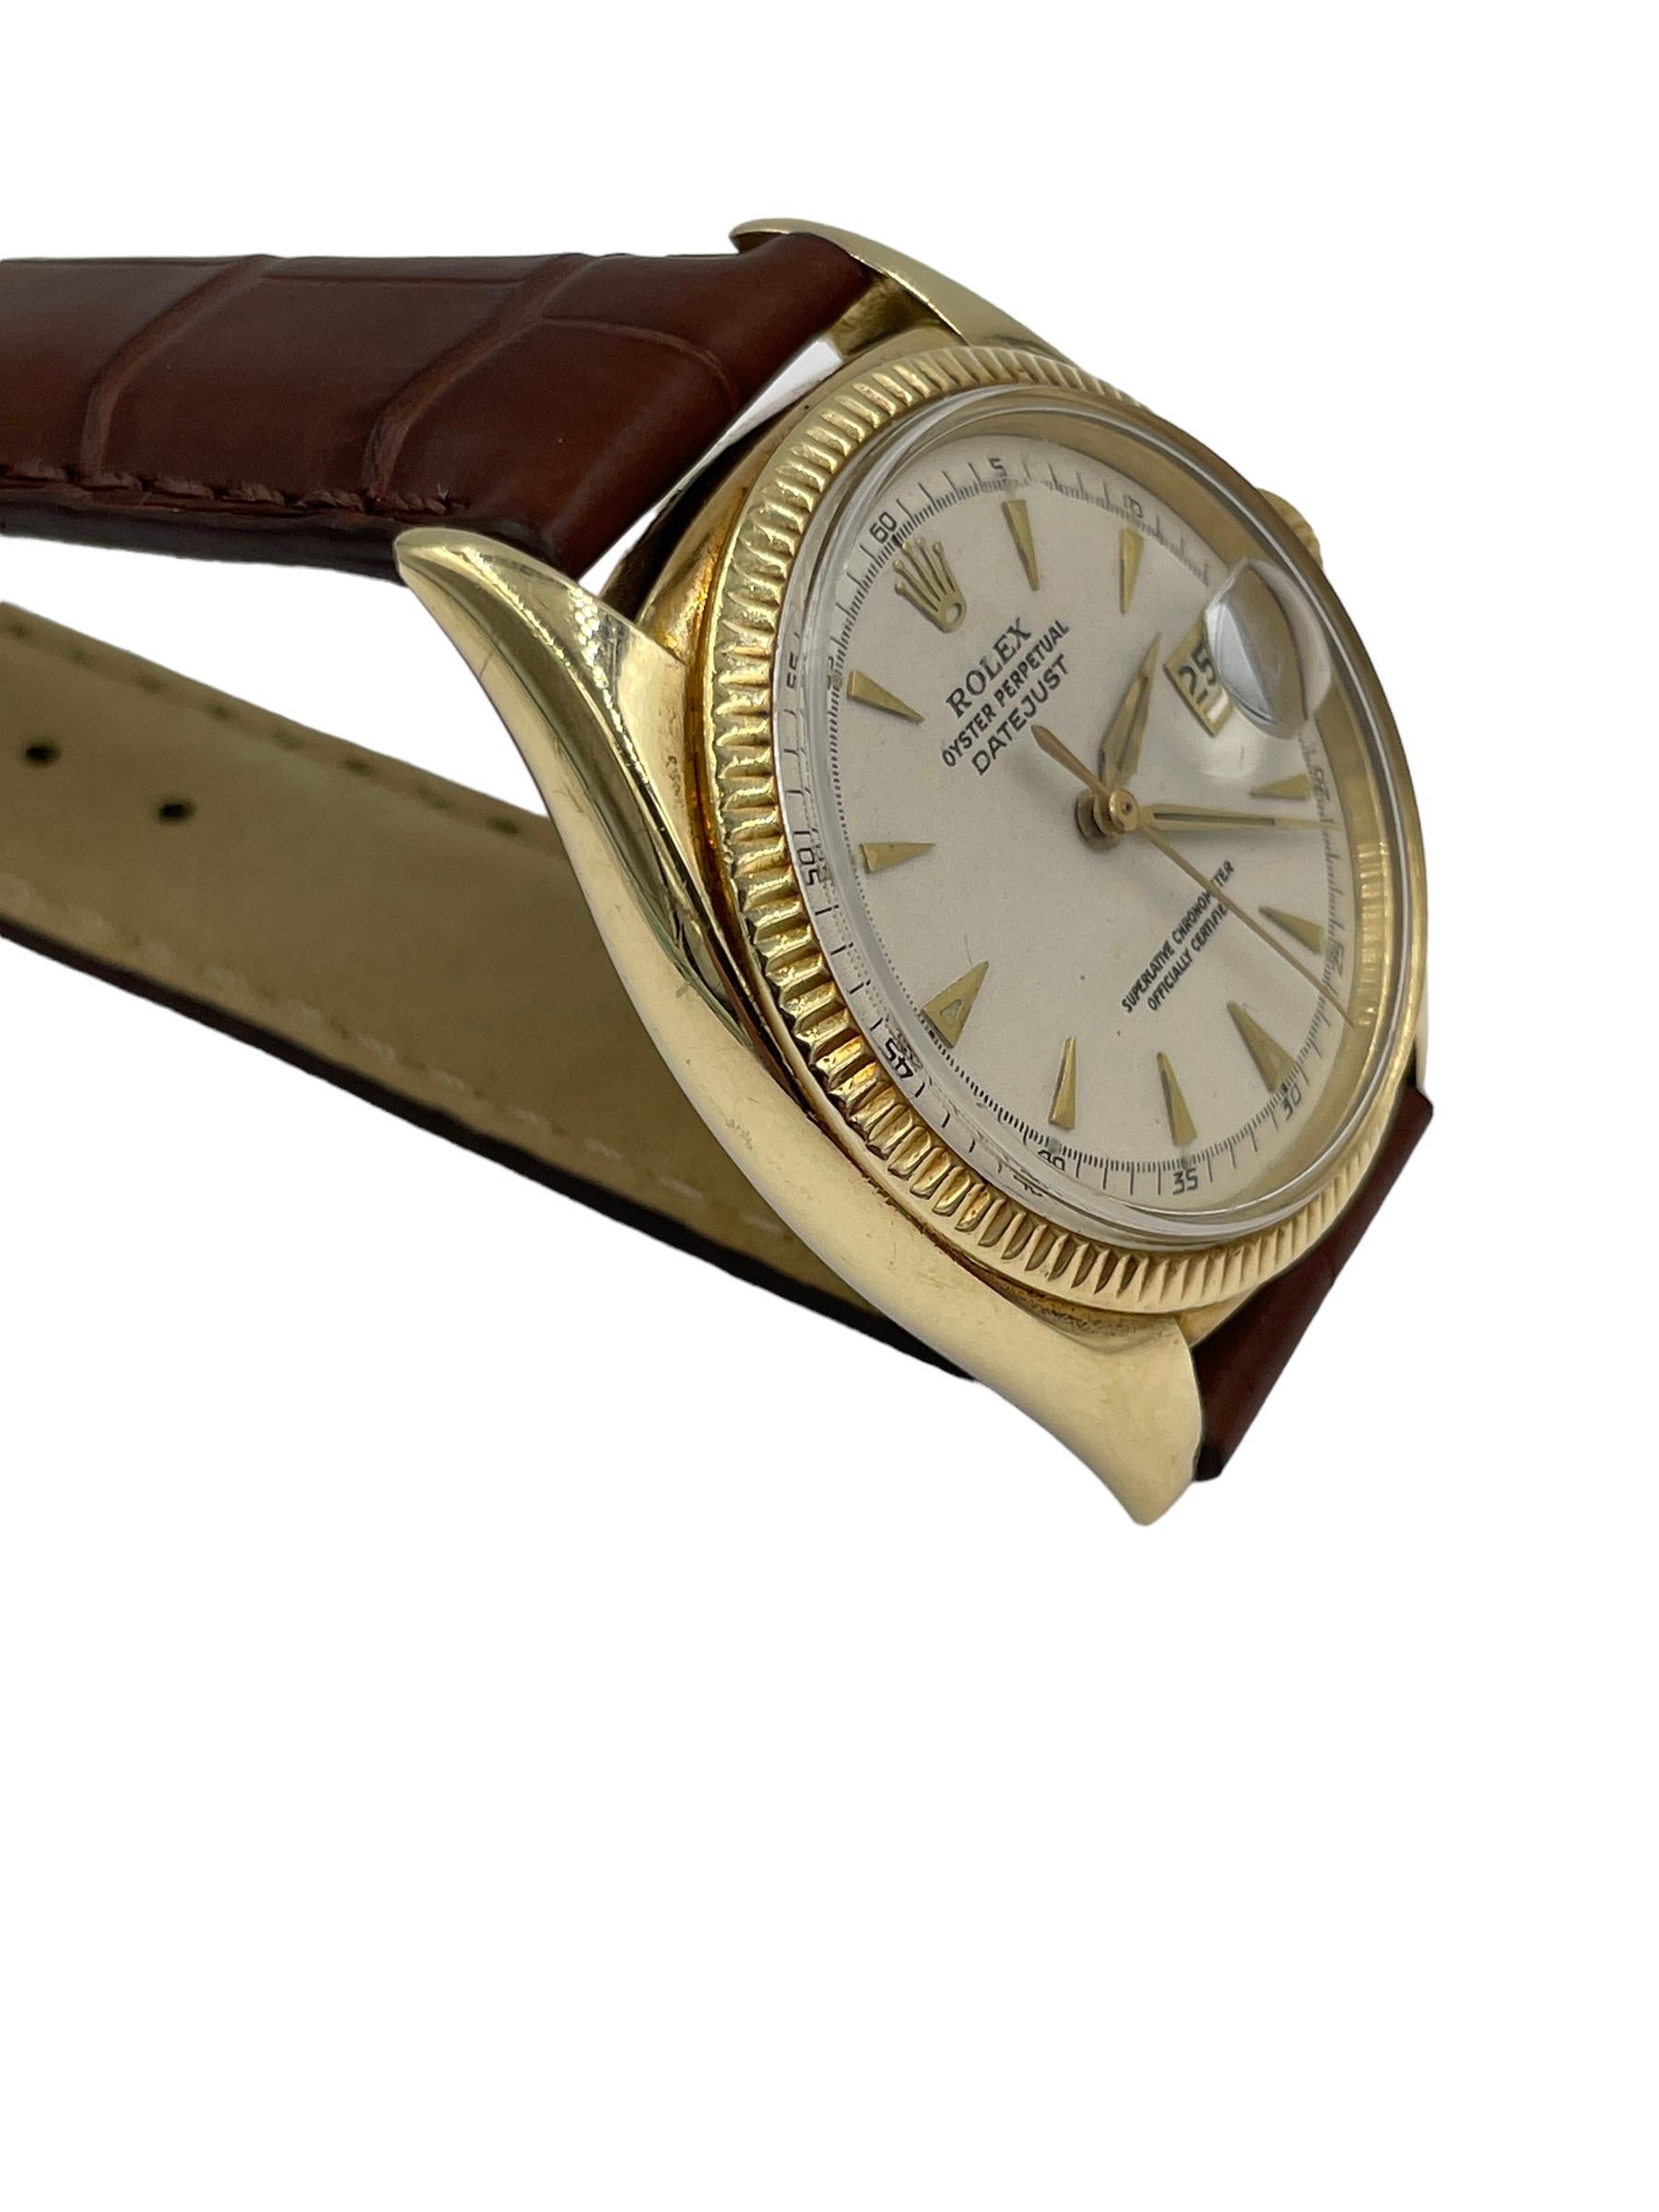 Vintage Rolex Oyster Perpetual Date Yellow Gold Wristwatch, from the 1950s

SPECIFICATIONS:

ROLEX:  model # 6305, 

METAL:  14k yellow gold case

BRACELET:  brown alligator leather band

DIMENSIONS: 36mm

CONDITION:  high magnification photographs